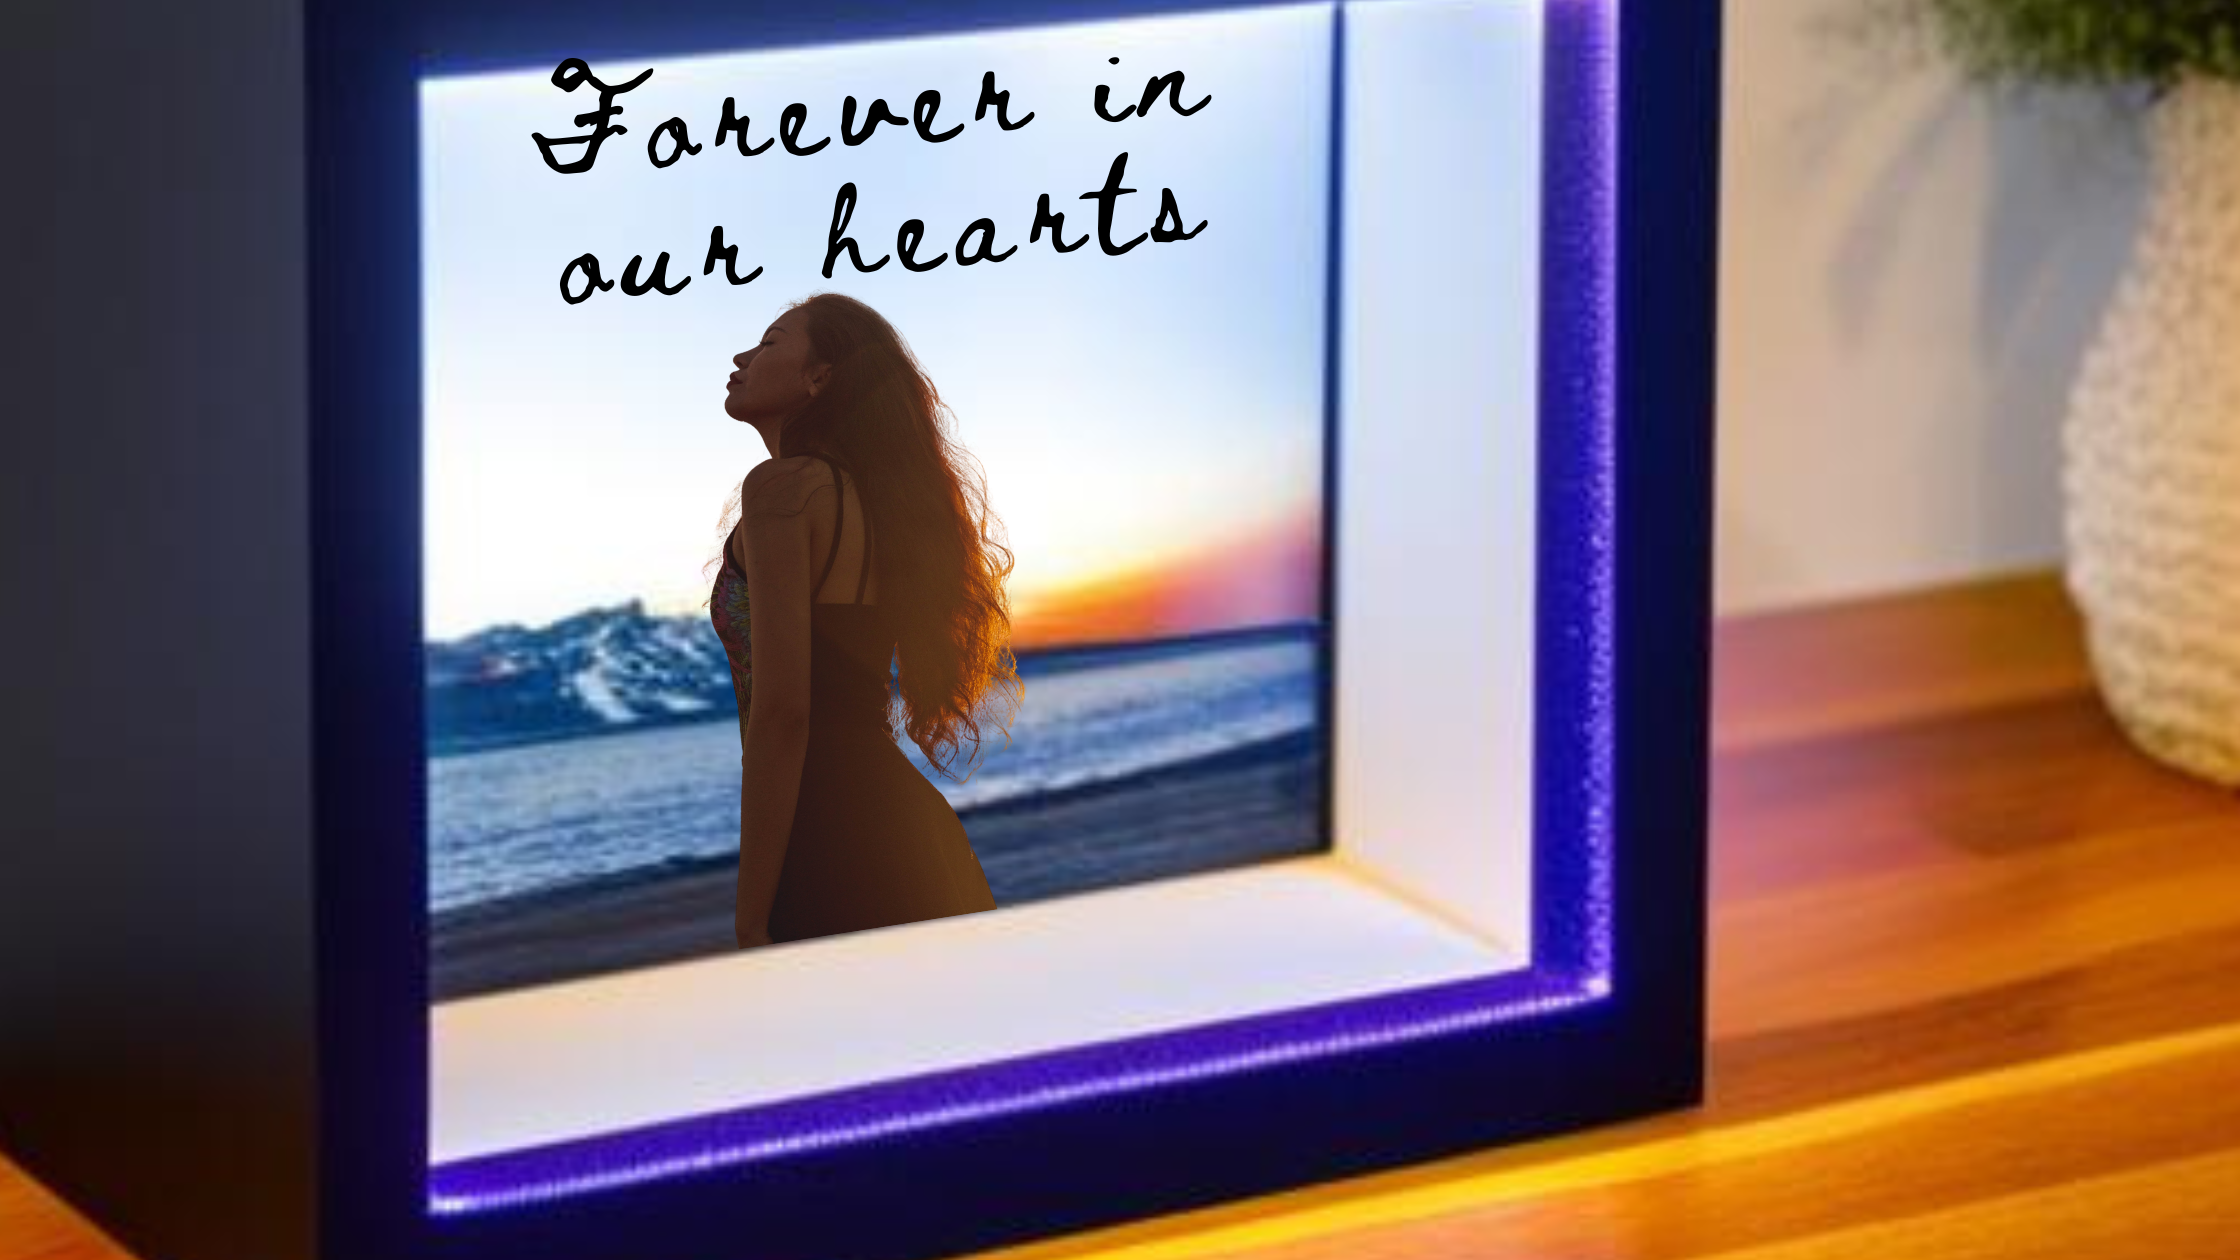 Personalized shadow box gift featuring friend who passed.